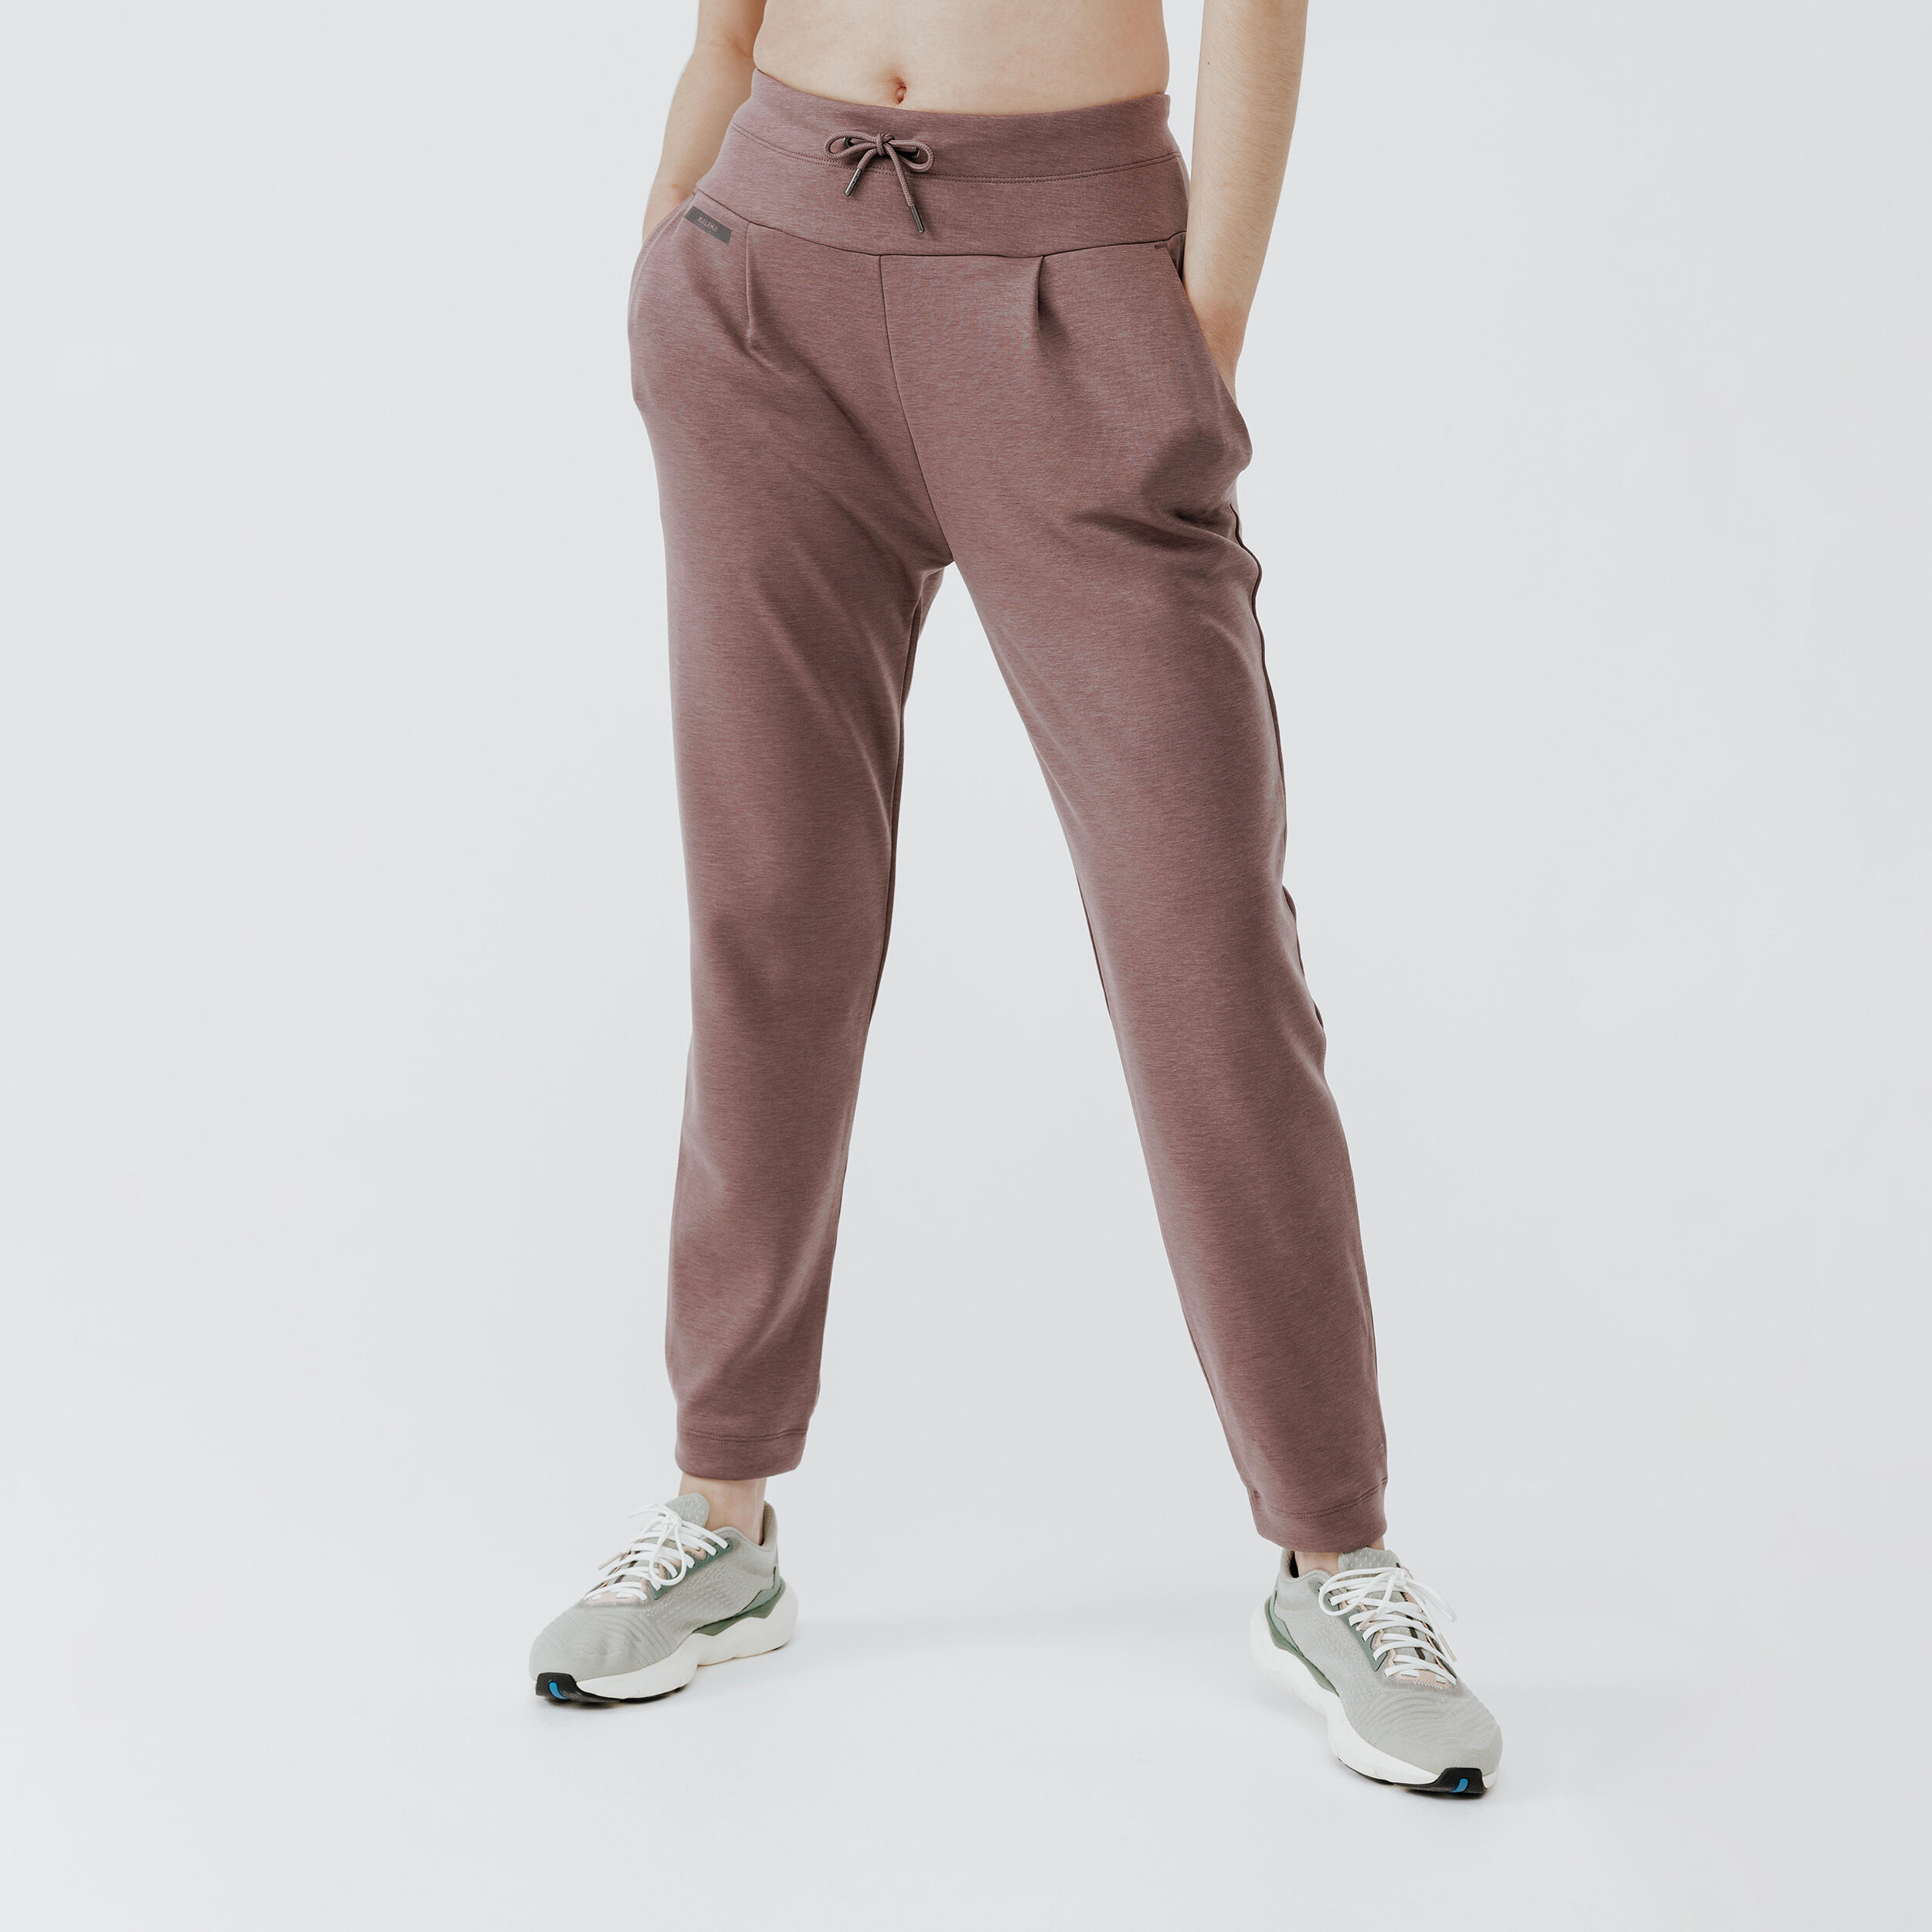 Buy Women's Stretch Formal Trousers Bundle Online in India